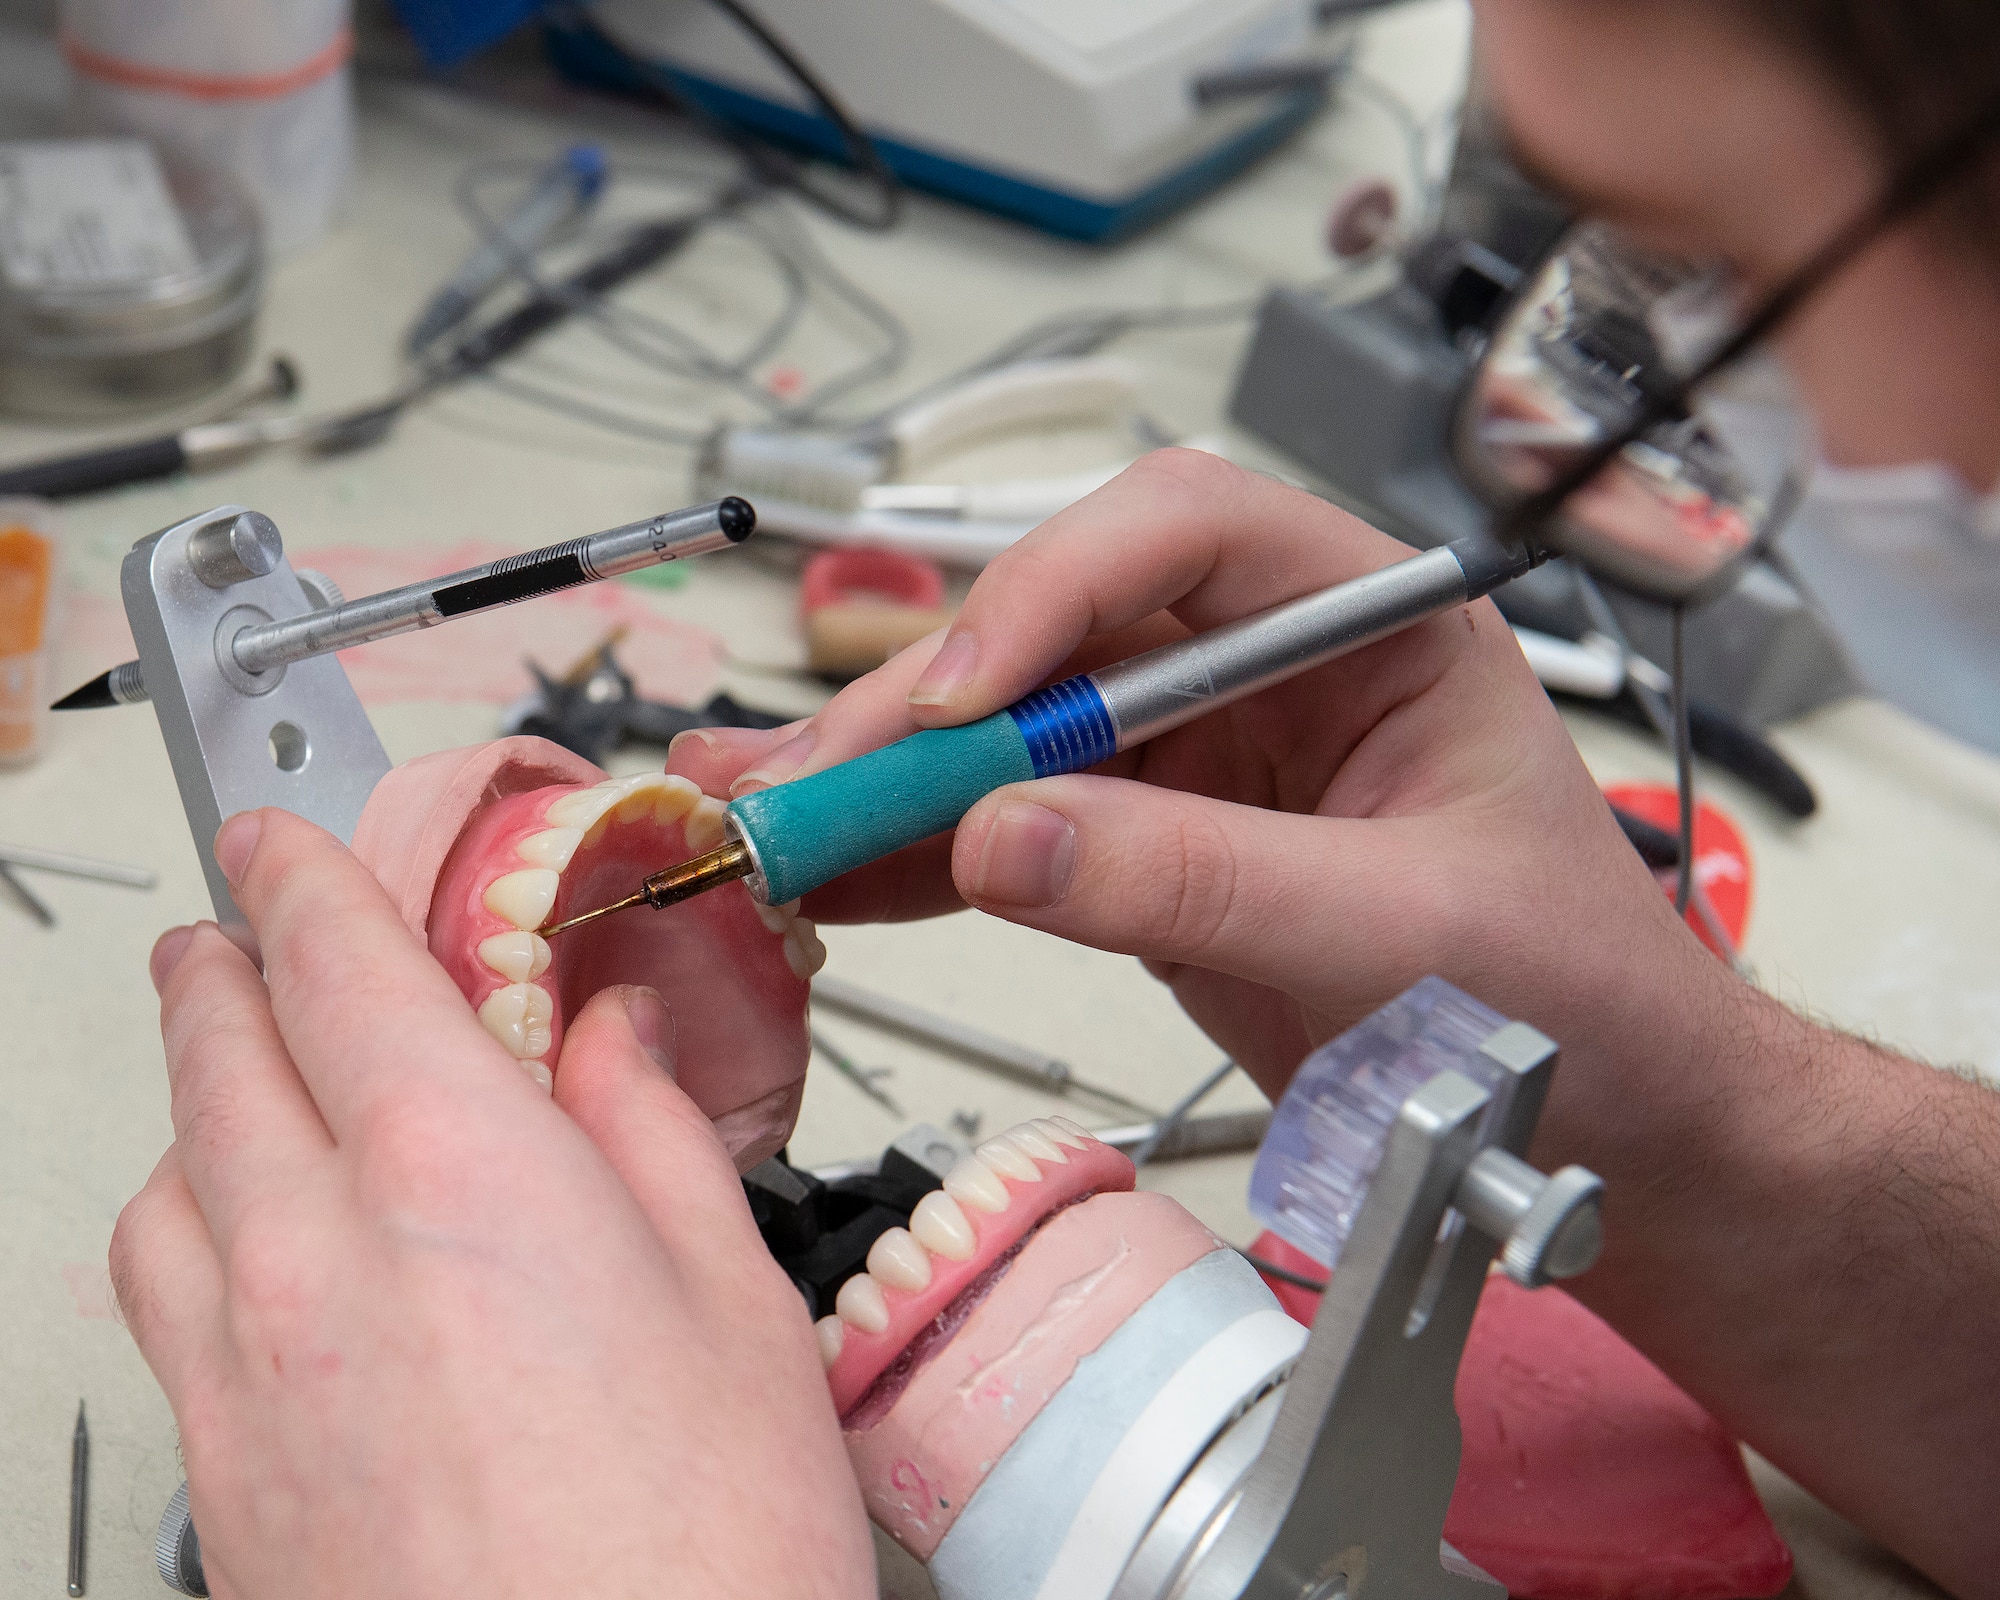 U.S. Air Force Senior Airman Nicholas Carter, 88th Dental Squadron dental laboratory technician, creates a set of dentures Feb. 22, 2021, in the dental clinic lab at Wright-Patterson Air Force Base, Ohio. Carter and other technicians make the prosthetics ordered by the clinic’s dentists . (U.S. Air Force photo by R.J. Oriez)